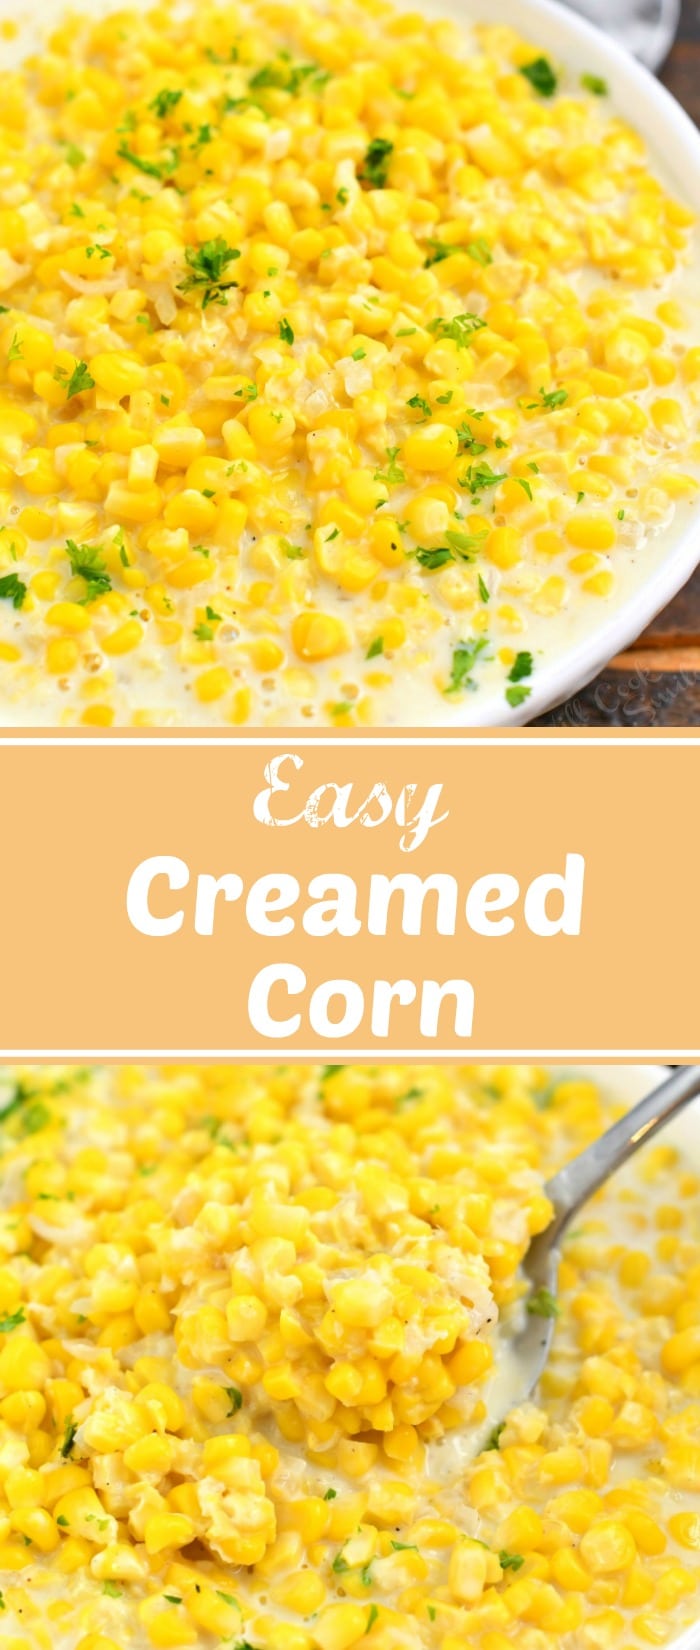 titled photo collage (and shown): Easy Creamed Corn